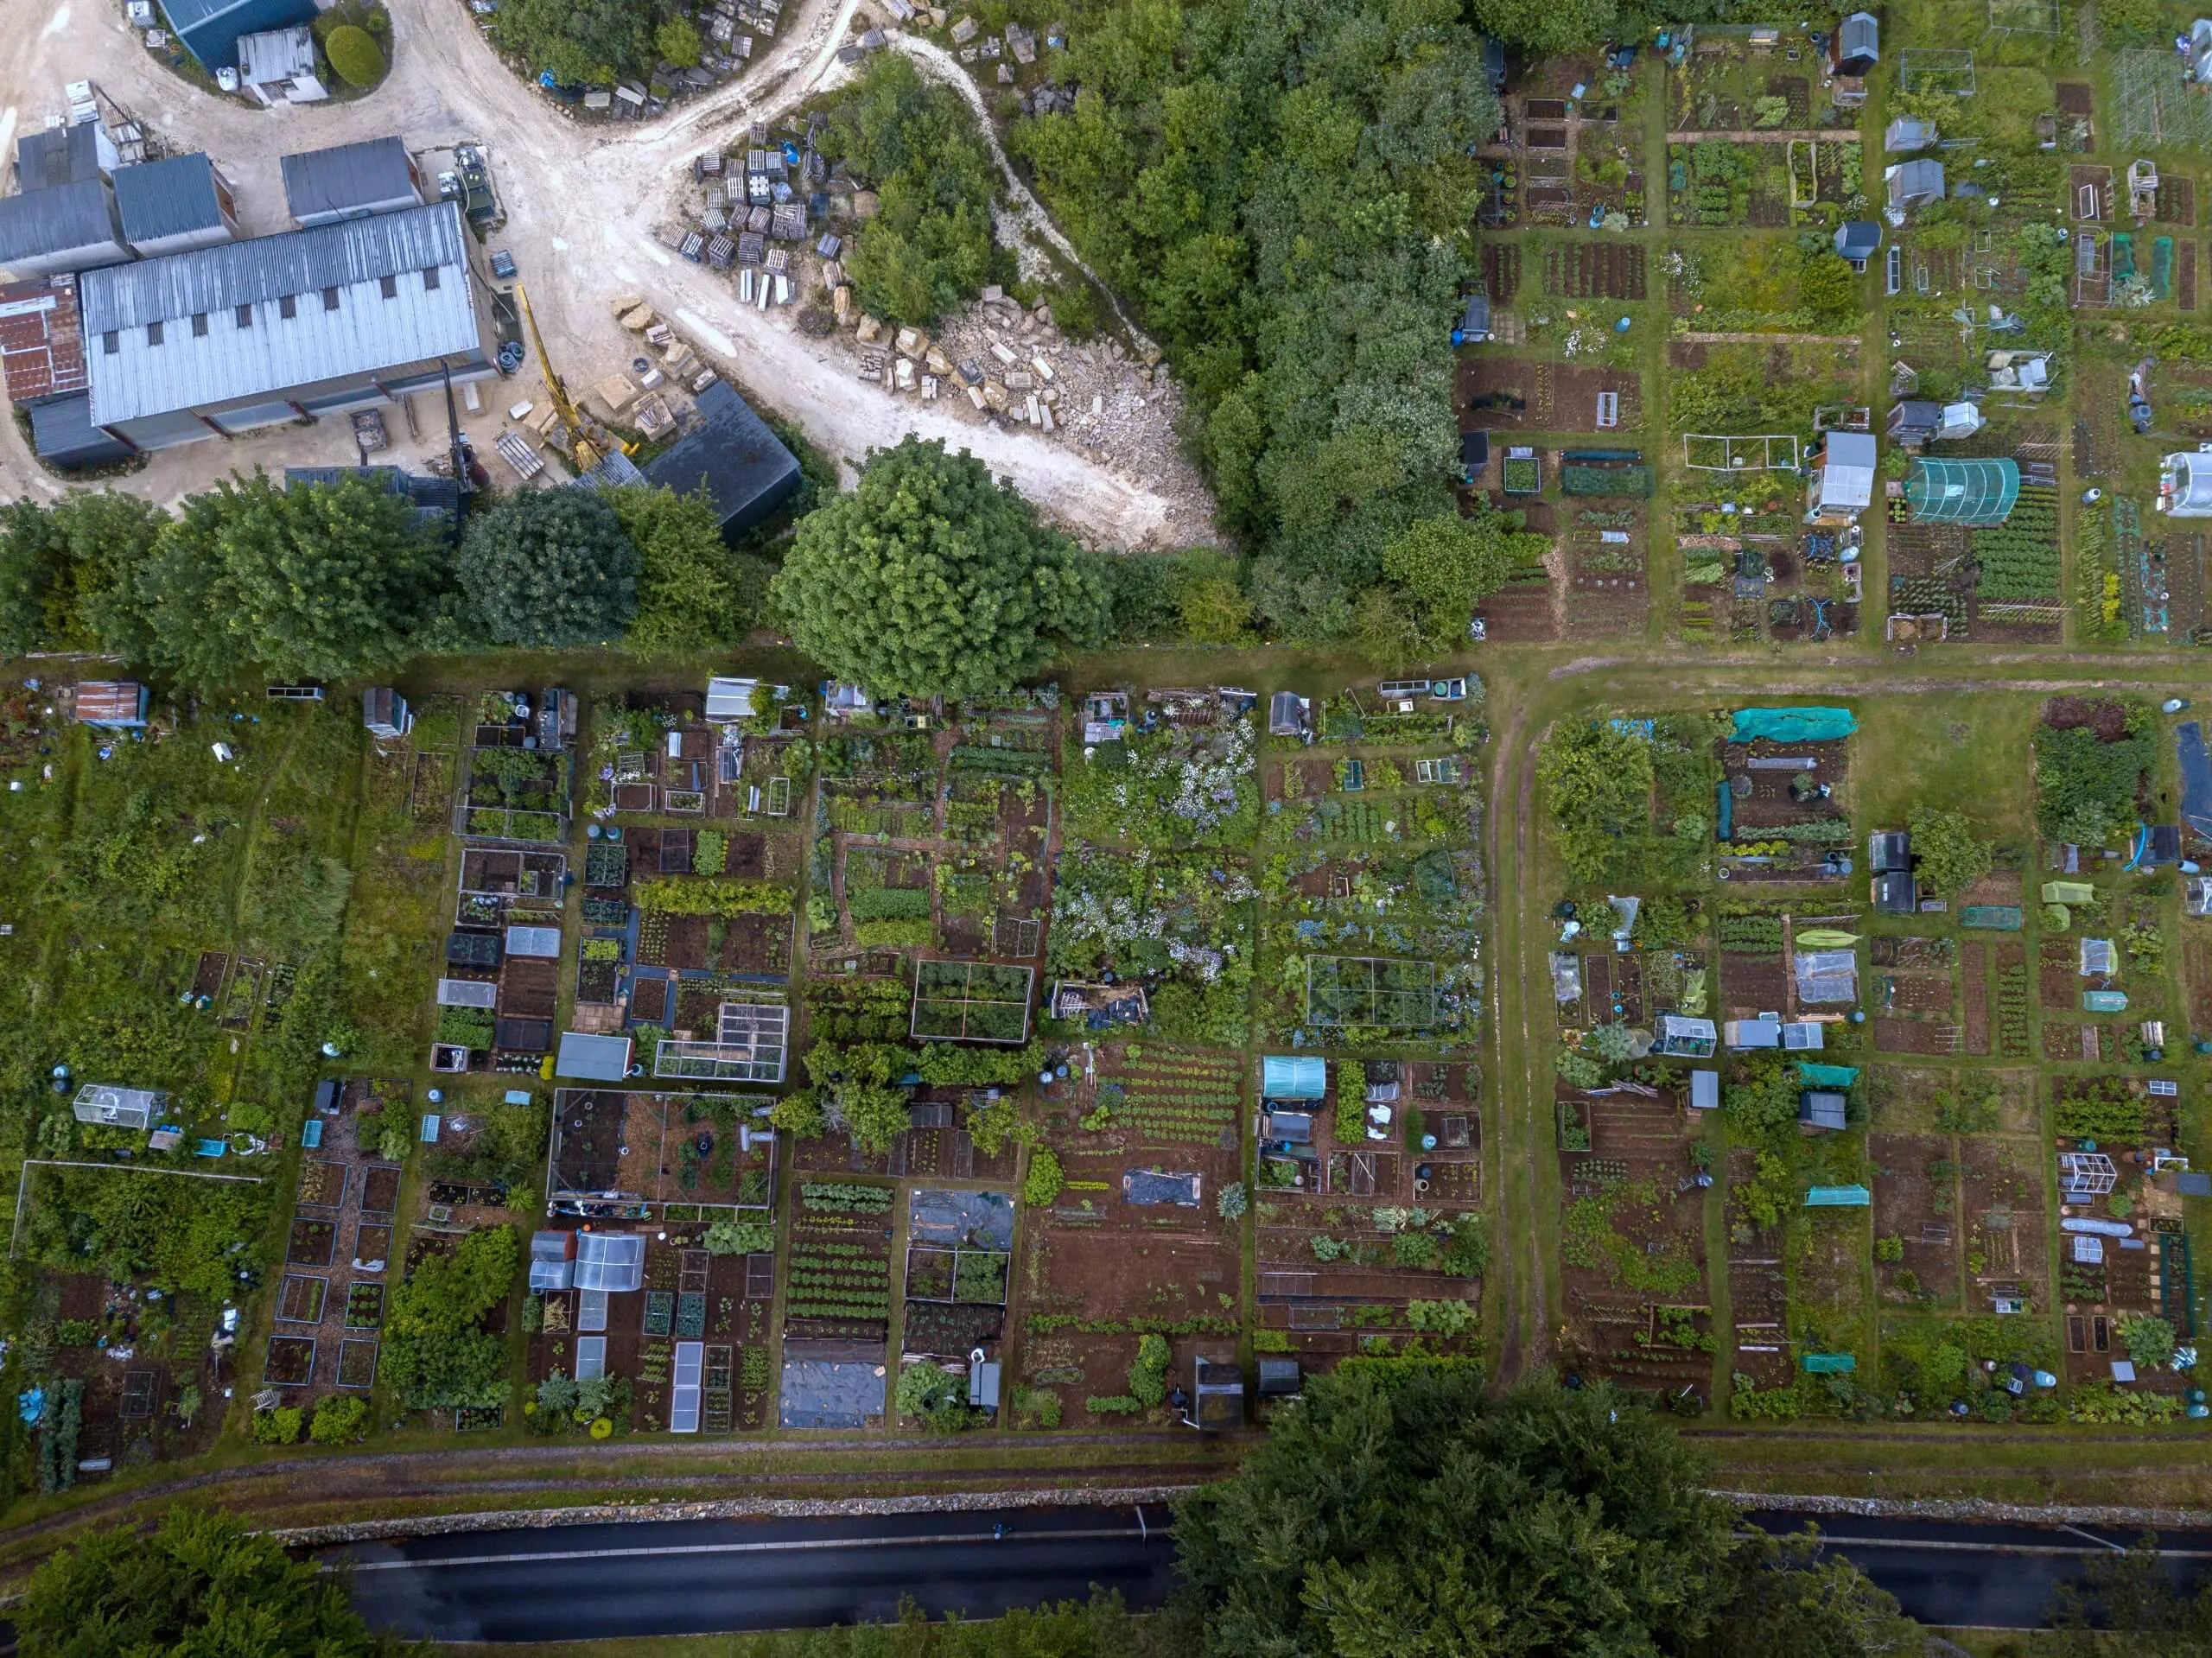 combe down allotments 2019